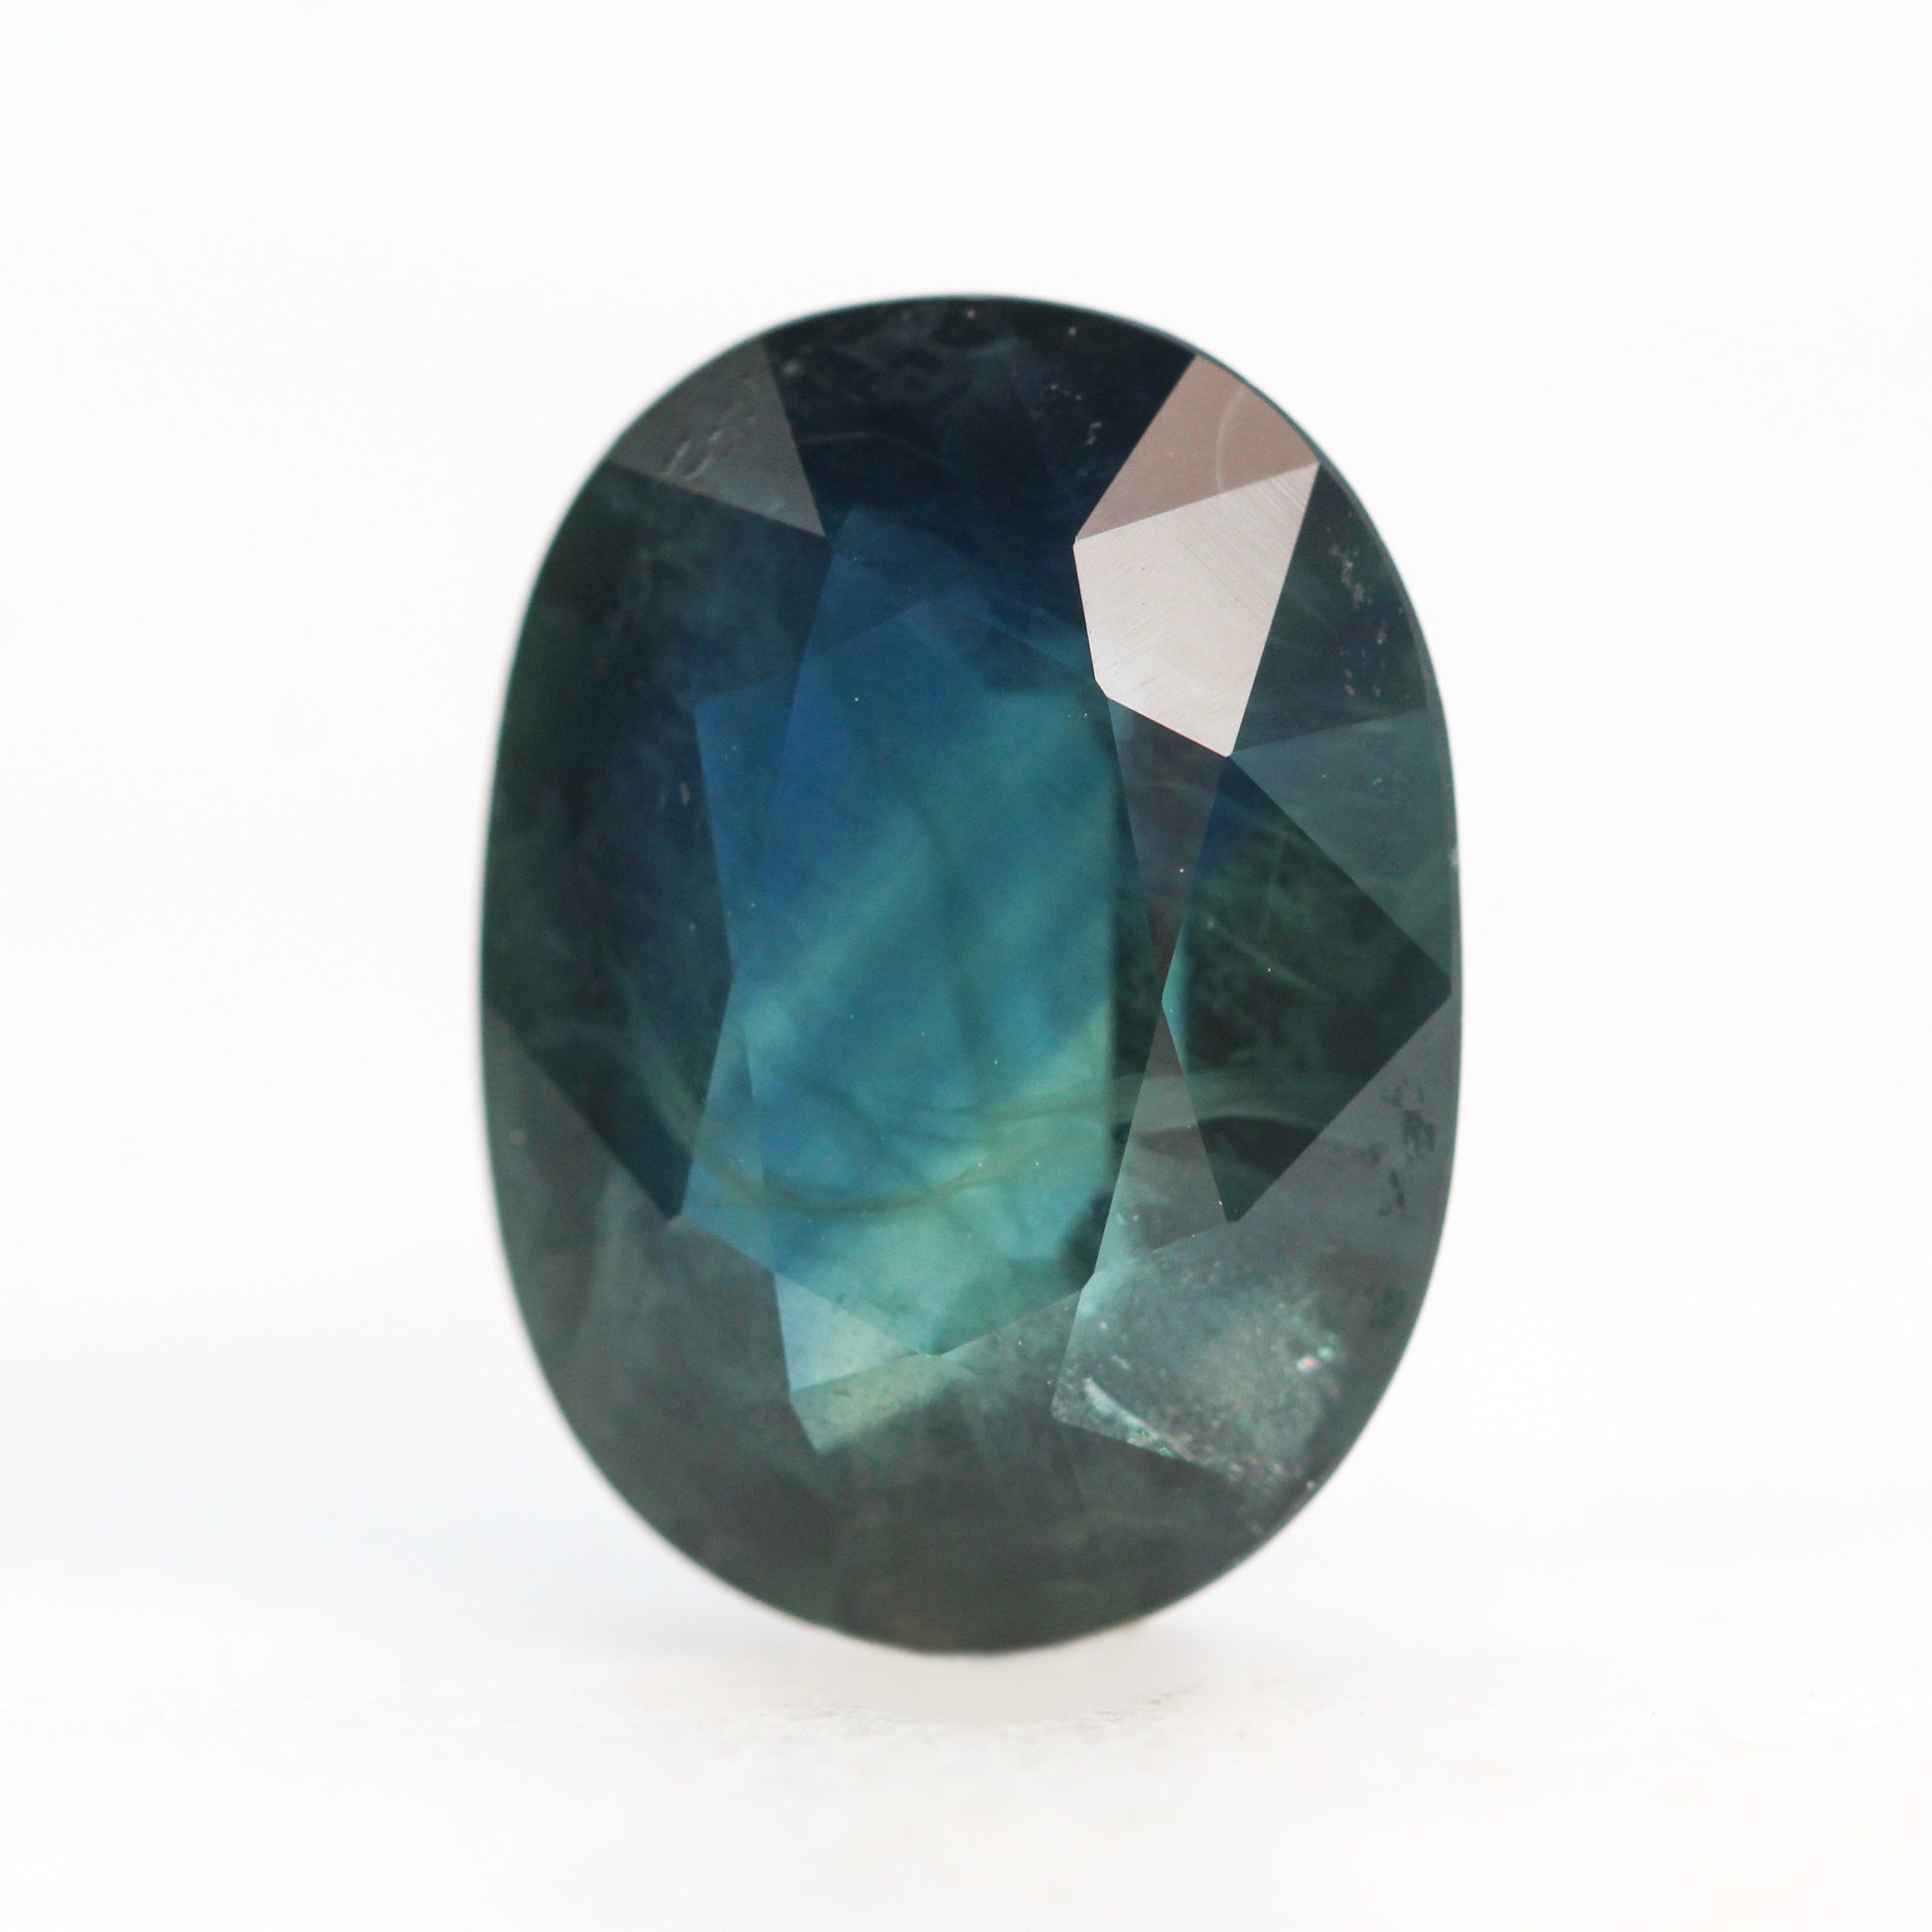 4.07 Carat Teal Oval Australian Sapphire for Custom Work - Inventory Code TOS407 - Midwinter Co. Alternative Bridal Rings and Modern Fine Jewelry